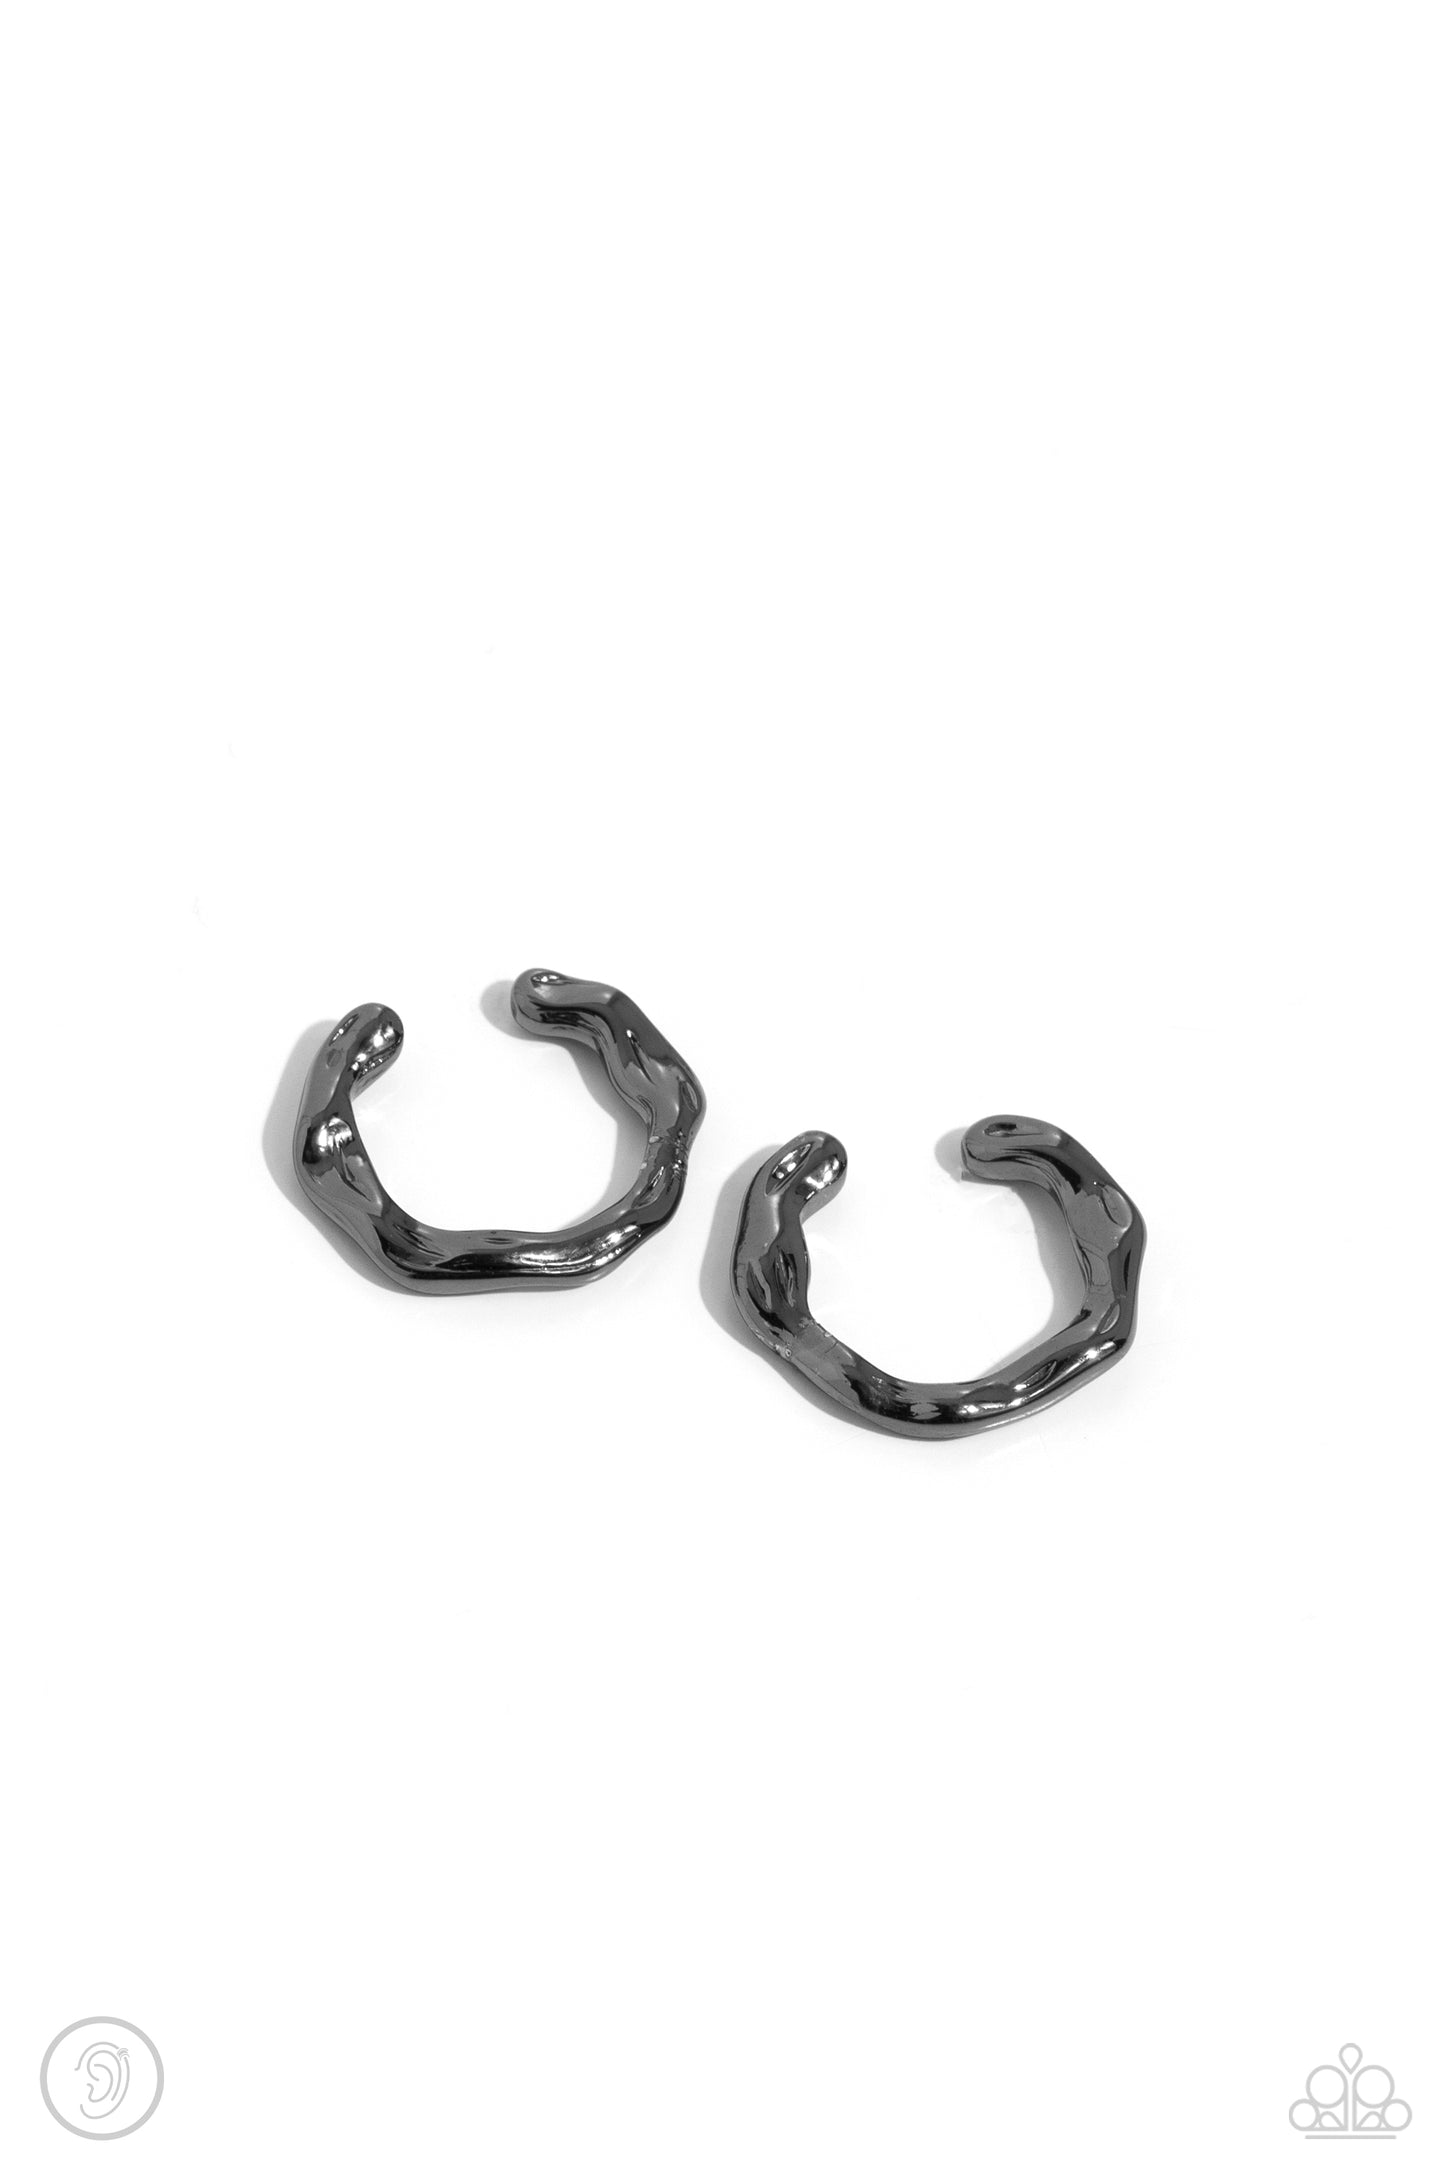 <p>Paparazzi Accessories - Enigmatic Echo - Black Ear Cuffs featuring an abstract pattern, a thin gunmetal bar curls into a warped cuff that wraps around the ear for a simplistic statement. Features a smooth surface for sliding ability to desired position on the ear. Due to its structure, adjusting capability is limited.</p> <p><i>Sold as one pair of cuff earrings.</i></p>